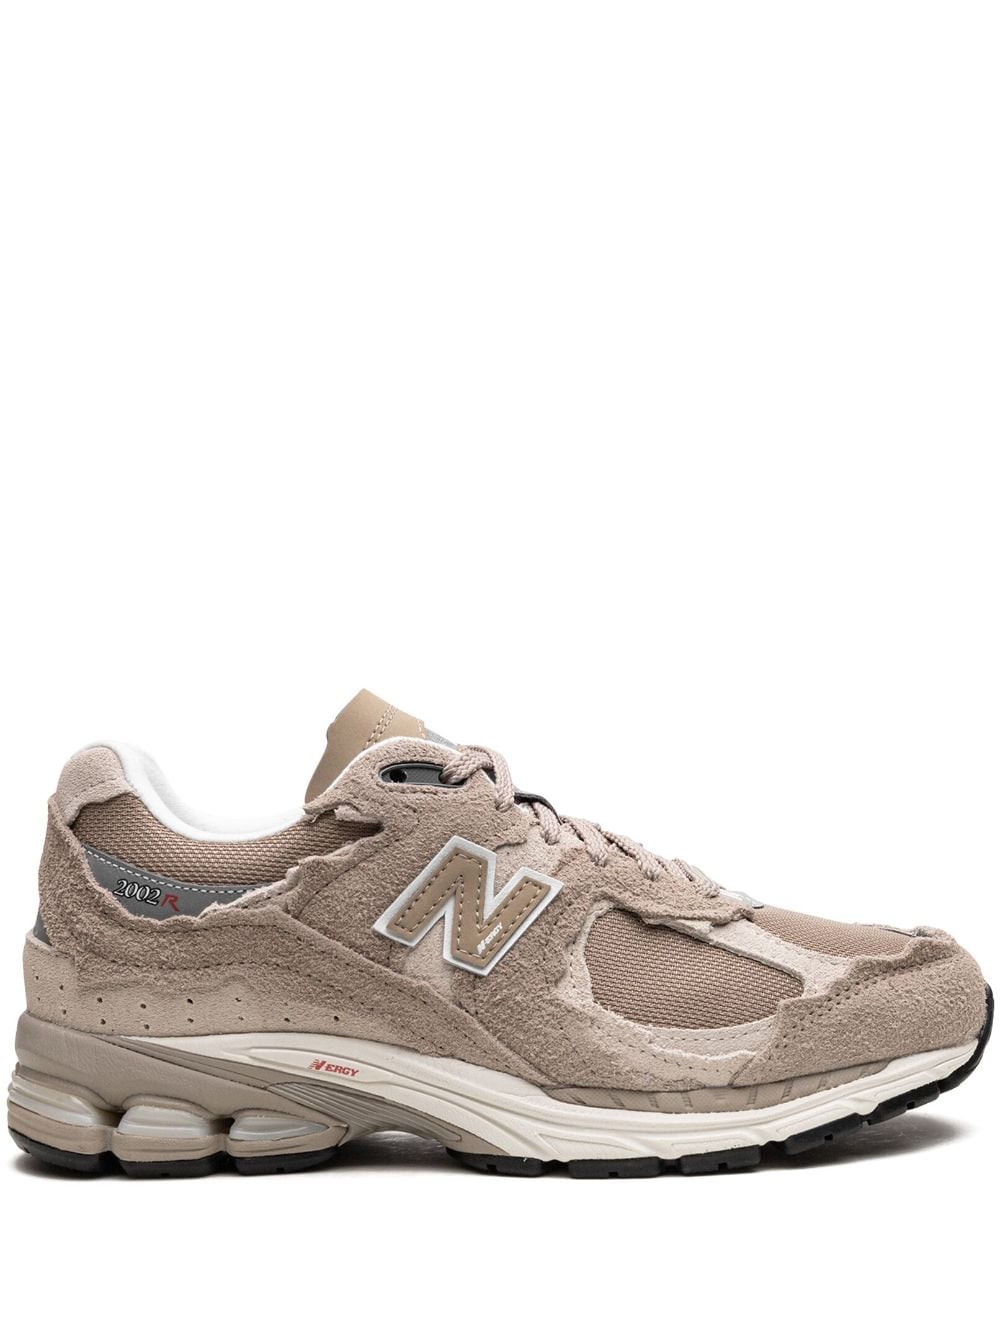 New Balance "2002R ""Protection Pack Driftwood"" sneakers" - Beige